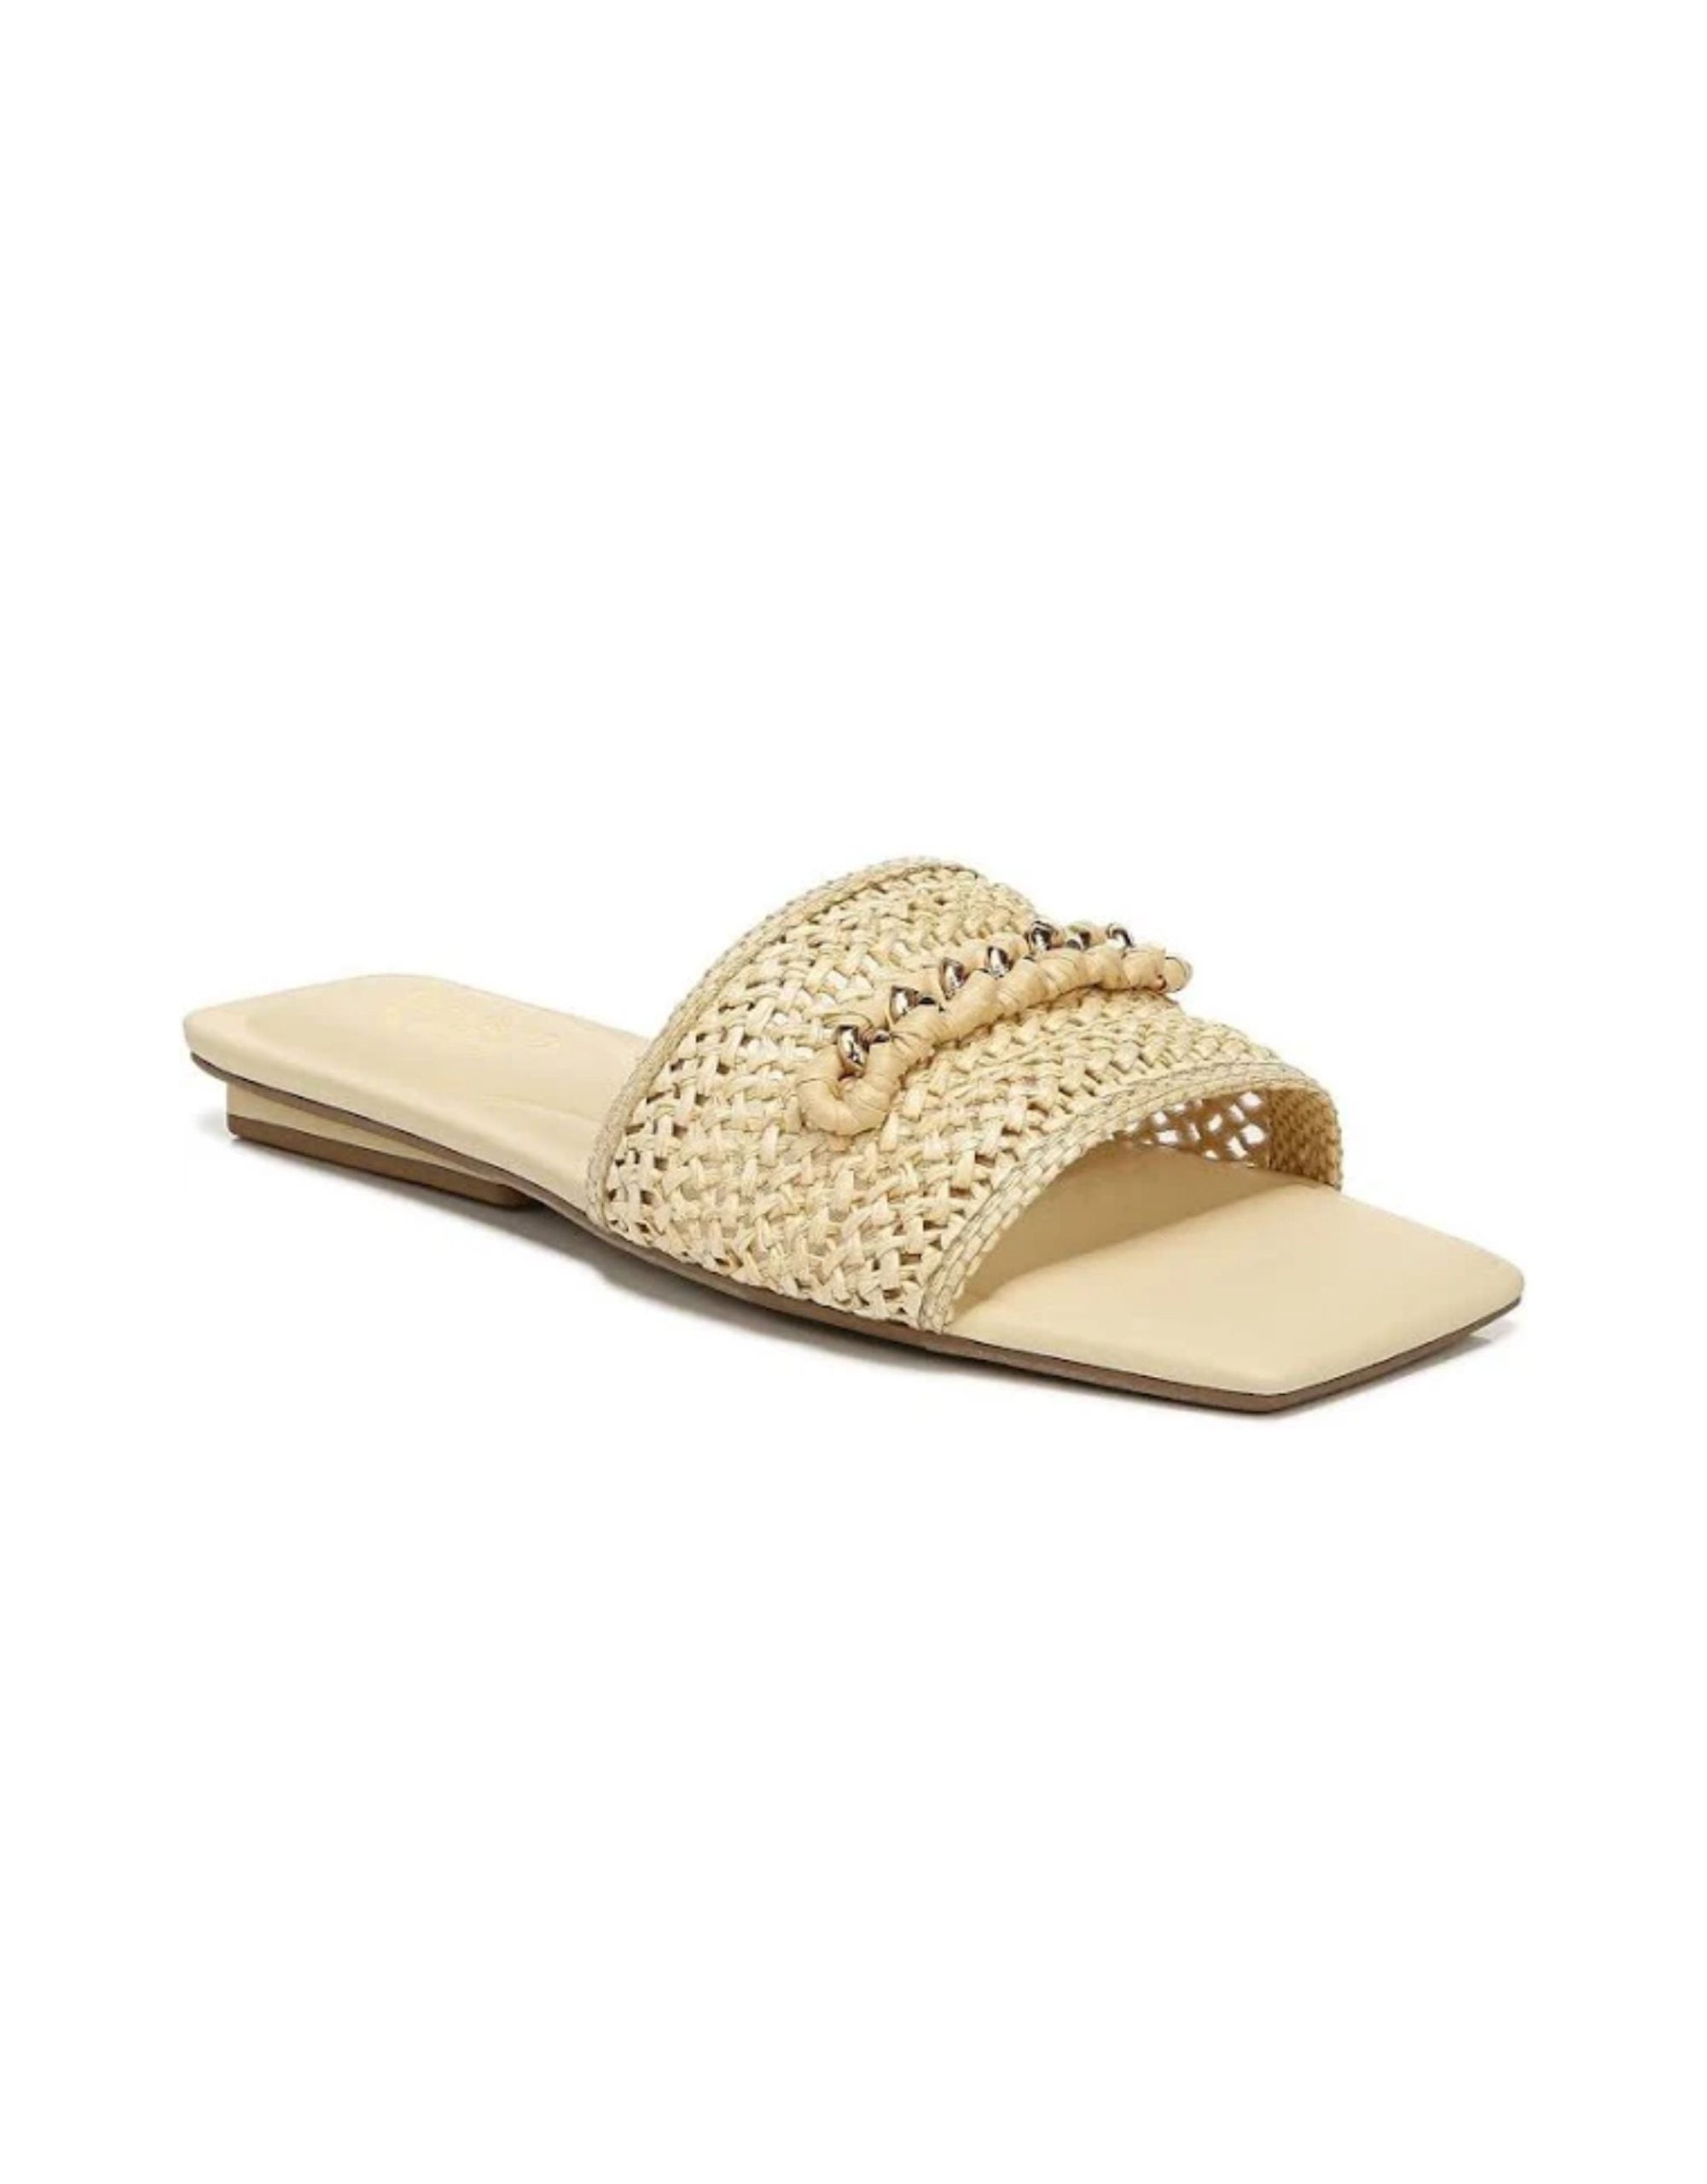 Sandal Season! Where To Shop For Sandals If You Have Wide Feet | Essence